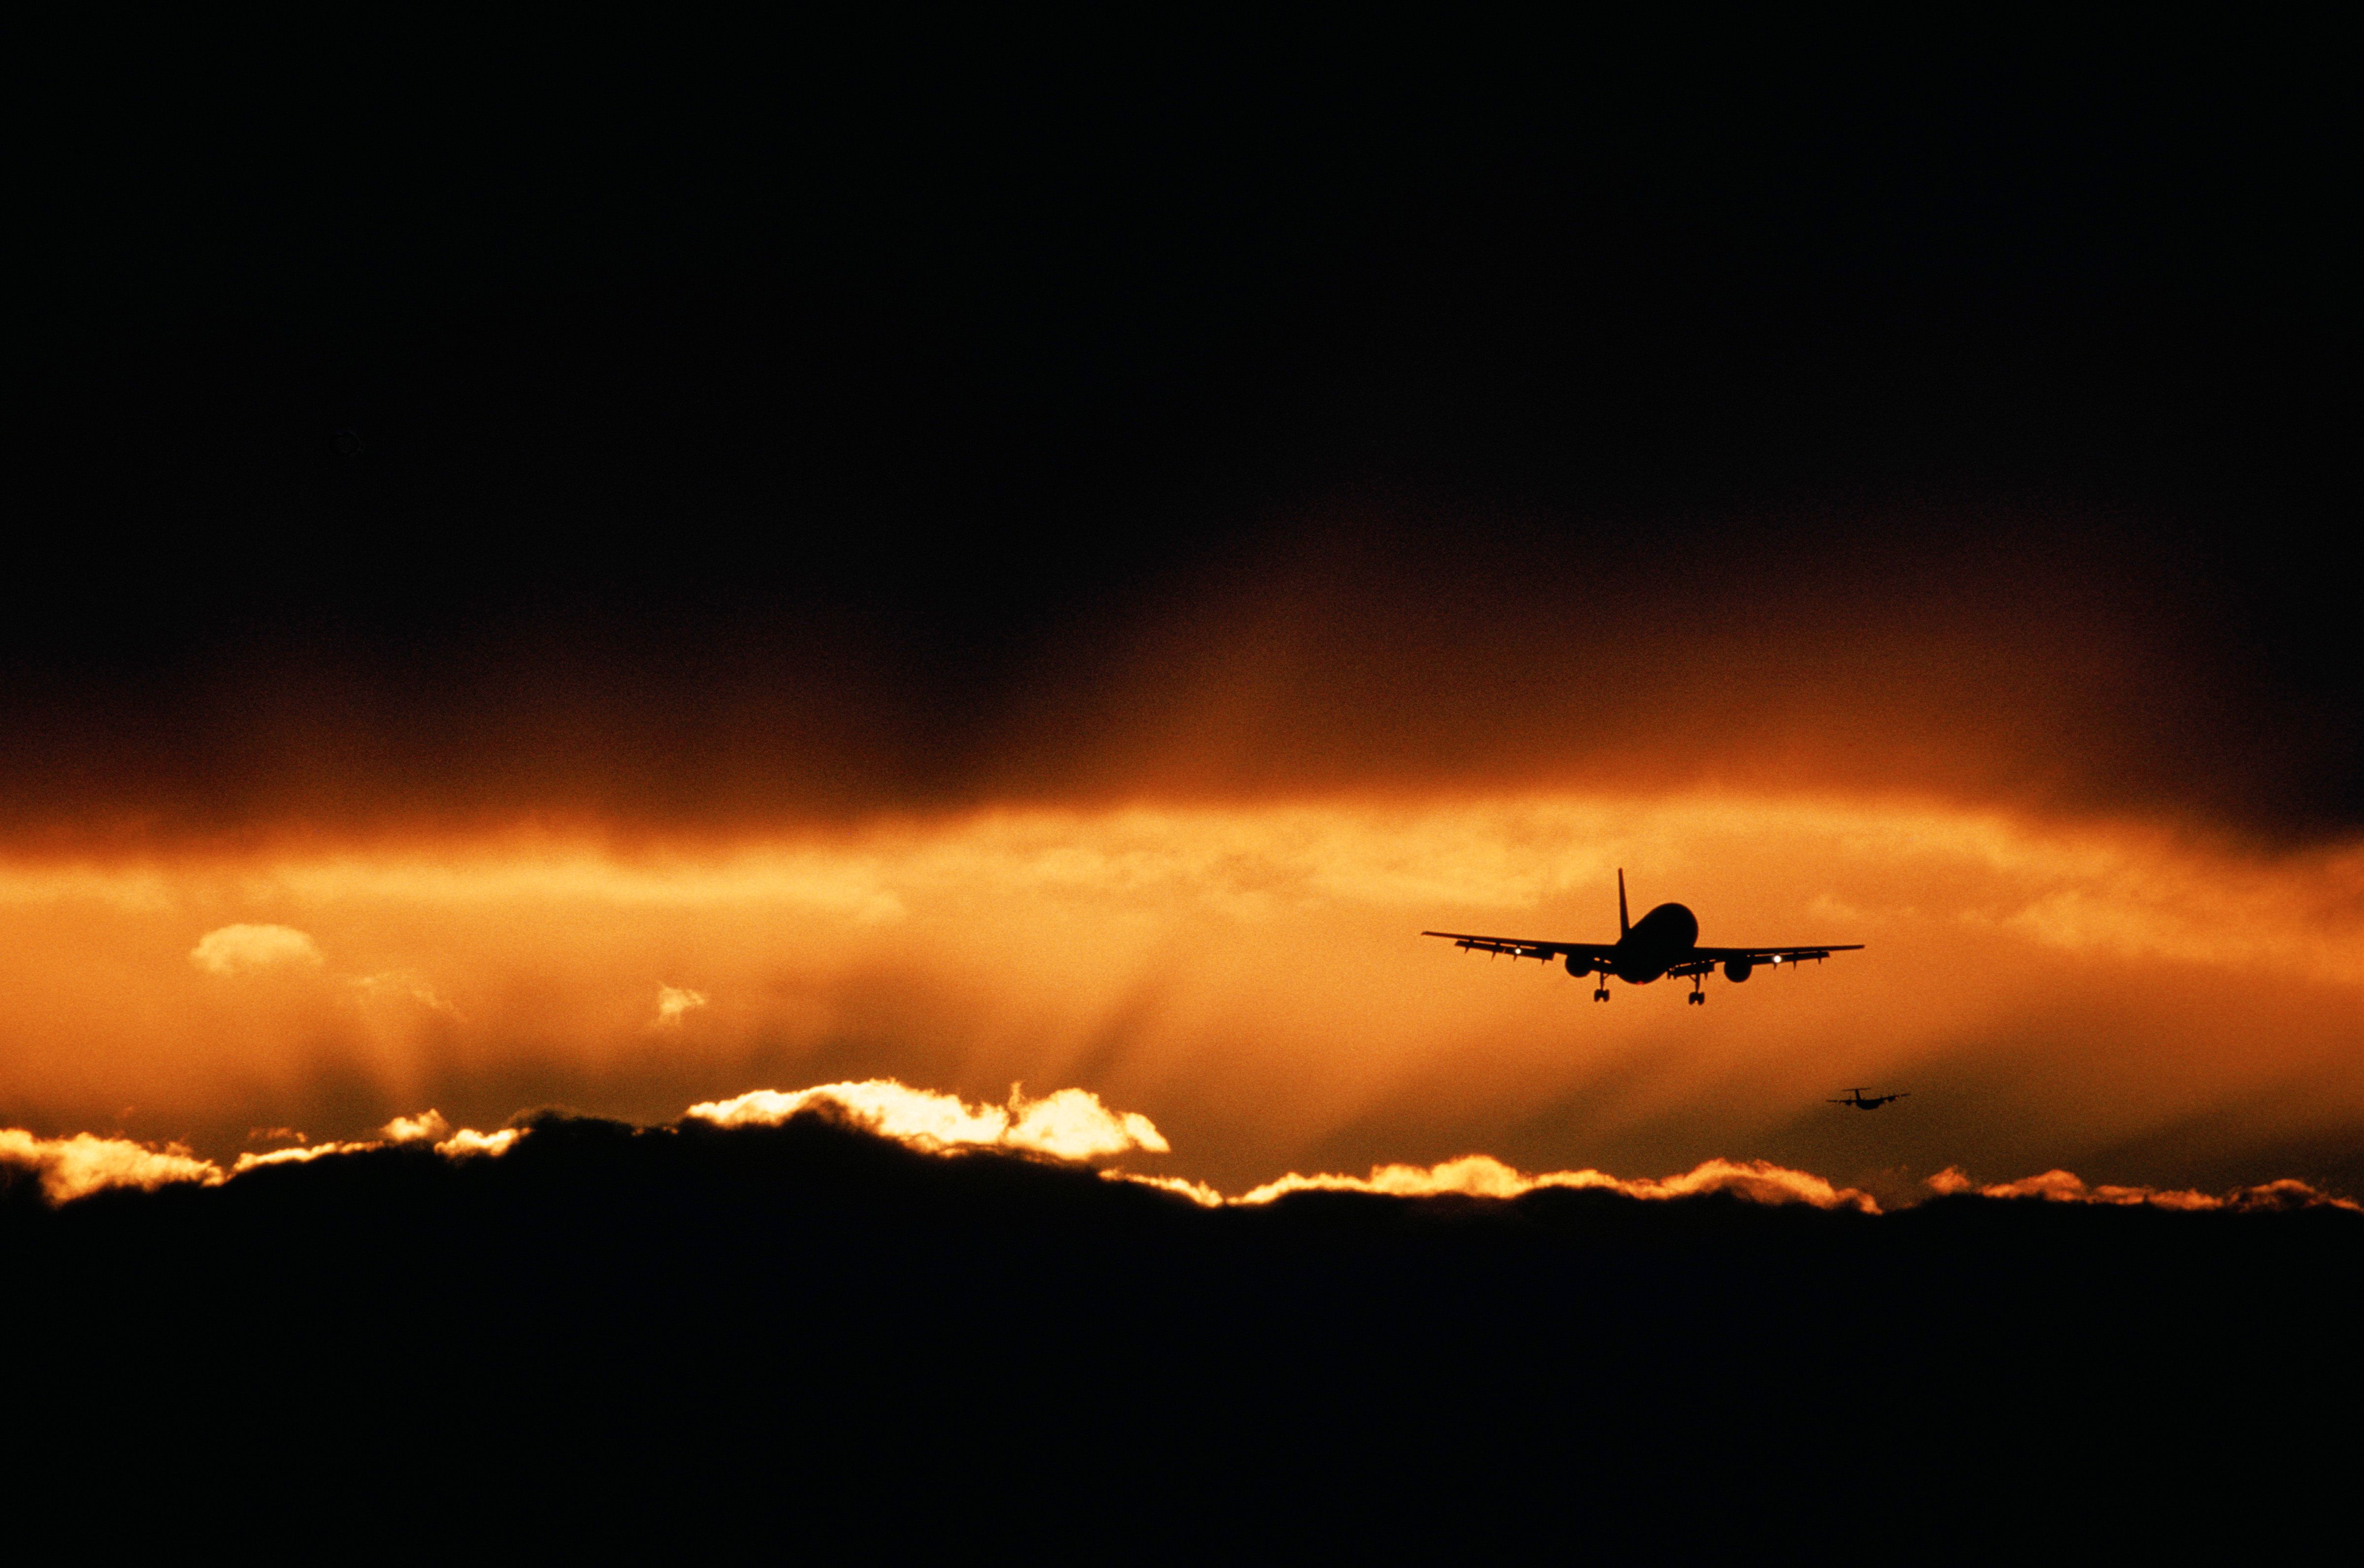 Silhouettes of Airbus A320 and a Bombardier DHC-8